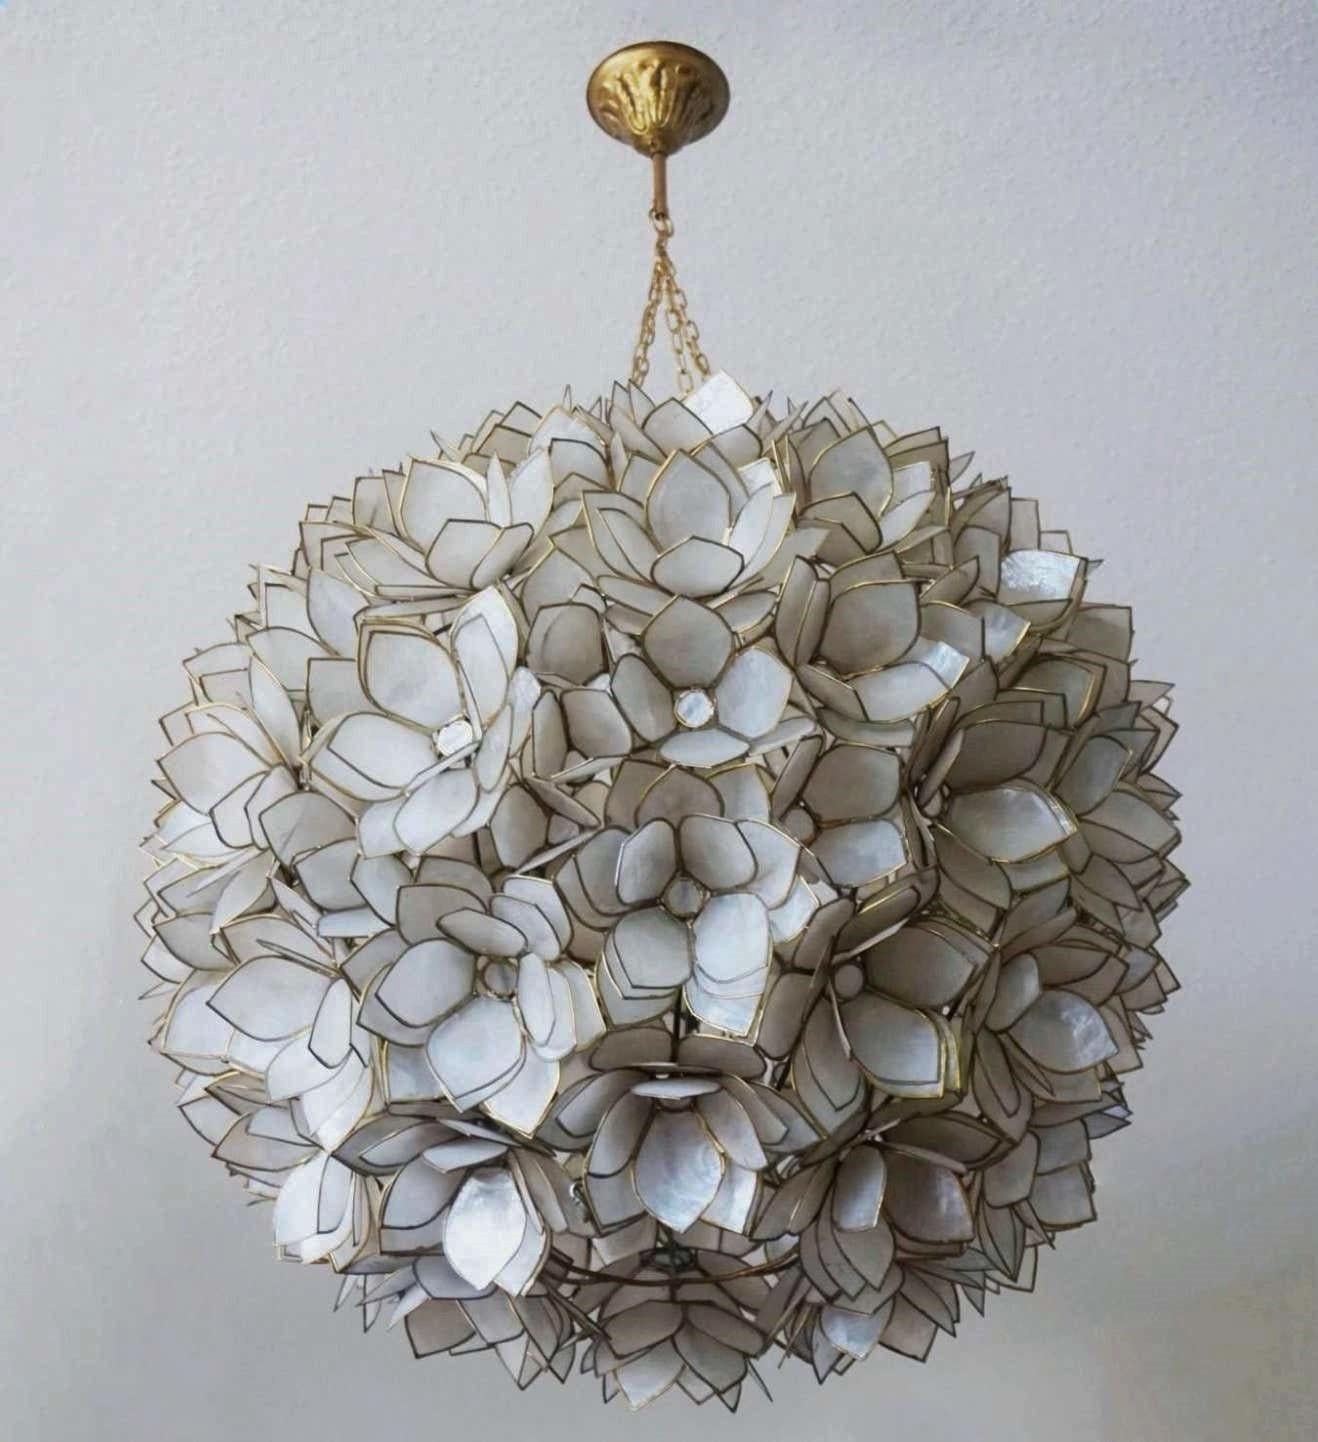 Large capiz shell mother of pearl and brass three-light globe shaped chandelier by Rausch Beleuchtung, Germany, 1960s. Handcrafted and assembled in a lotus flower pattern with brass edging. In fine vintage condition, rewired. It takes three Edison